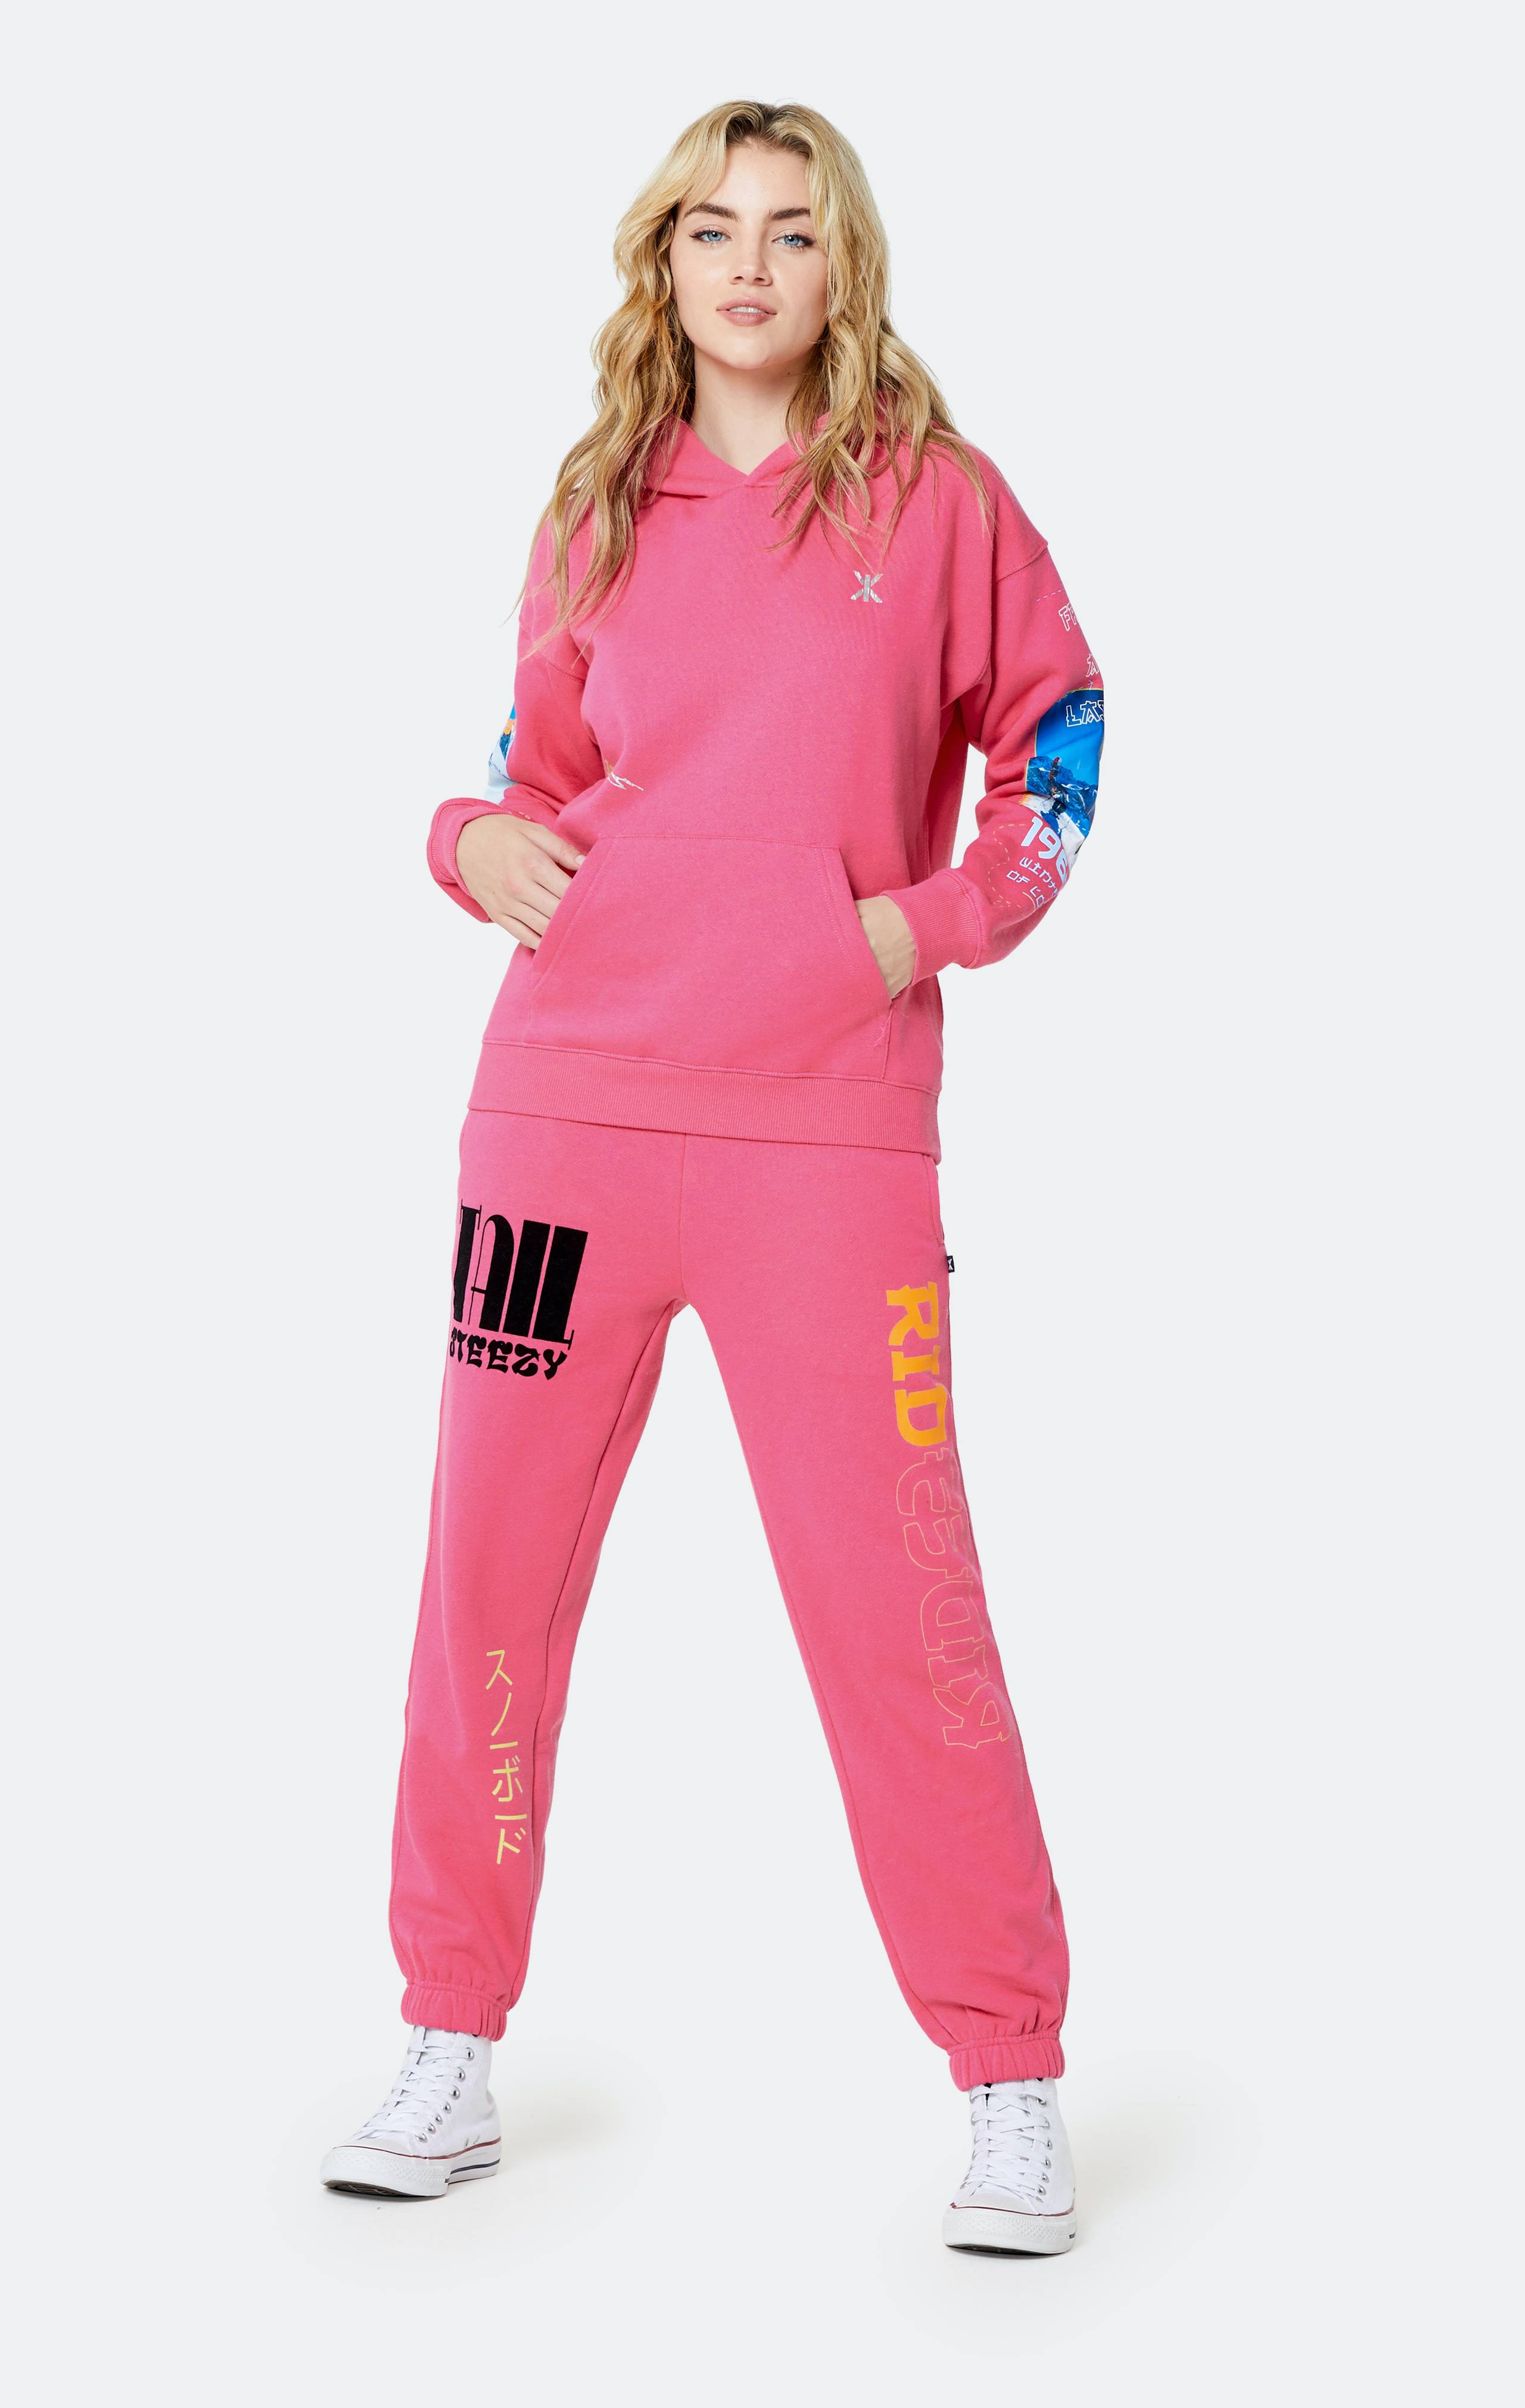 Onepiece Off Piste Pant Pink - 11